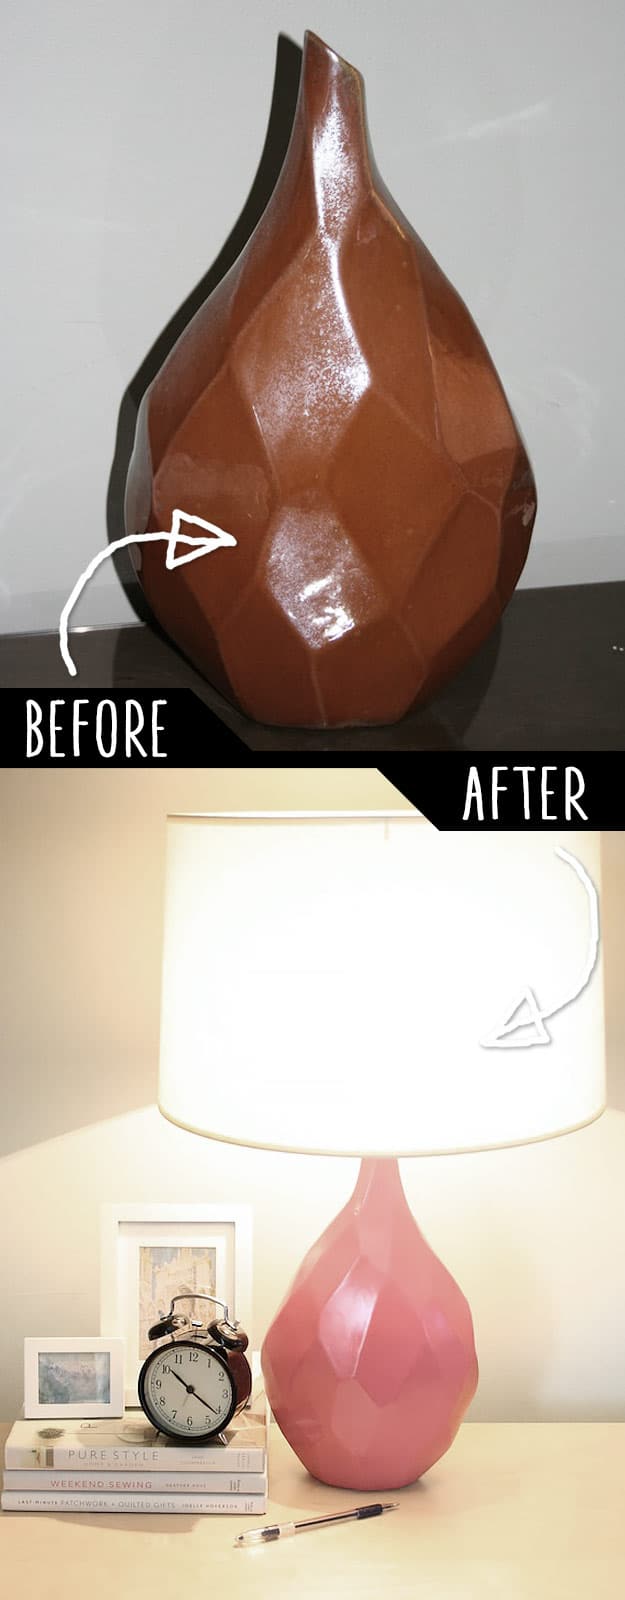 DIY Furniture Hacks | Old Unused Vase into an Adorable Table Lamp | Cool Ideas for Creative Do It Yourself Furniture | Cheap Home Decor Ideas for Bedroom, Bathroom, Living Room, Kitchen - http://diyjoy.com/diy-furniture-hacks